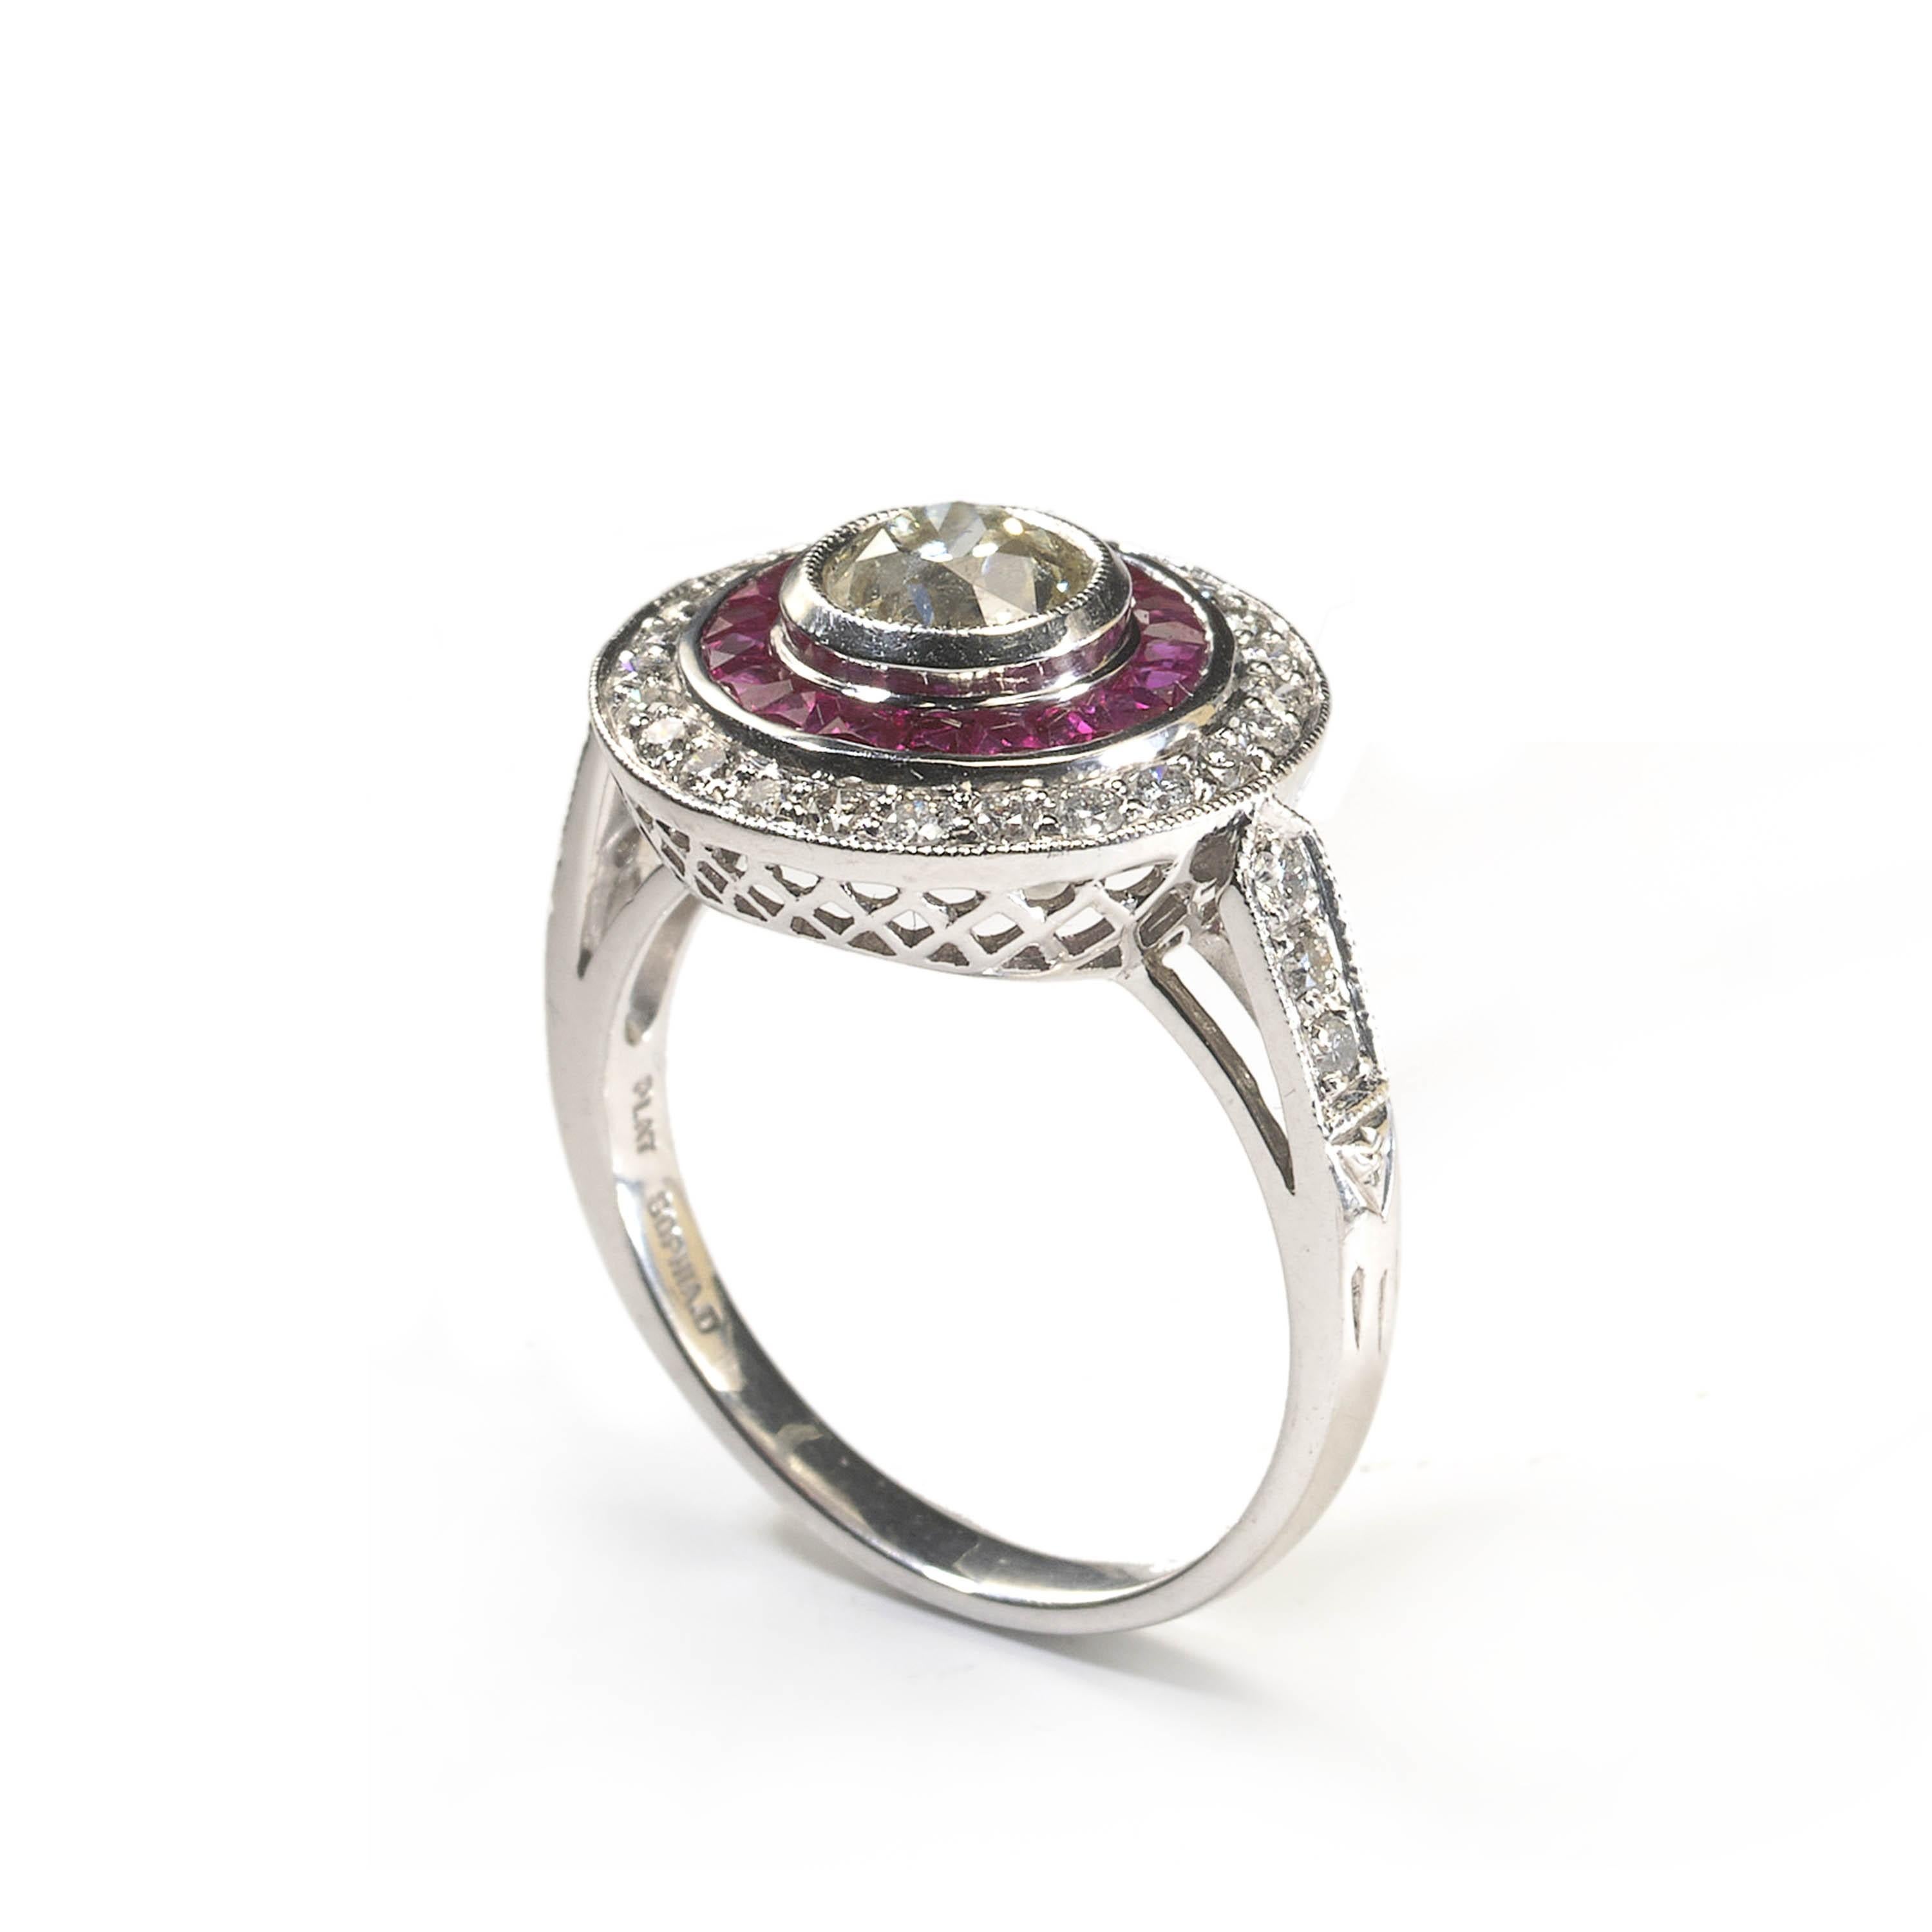 An Art Deco style diamond and ruby ring, set with a 0.93ct round European old-cut diamond, in our opinion the colour is K to L, our opinion of the clarity is VS, in a millegrain edged rub over setting, surrounded by nineteen, French-cut rubies, with